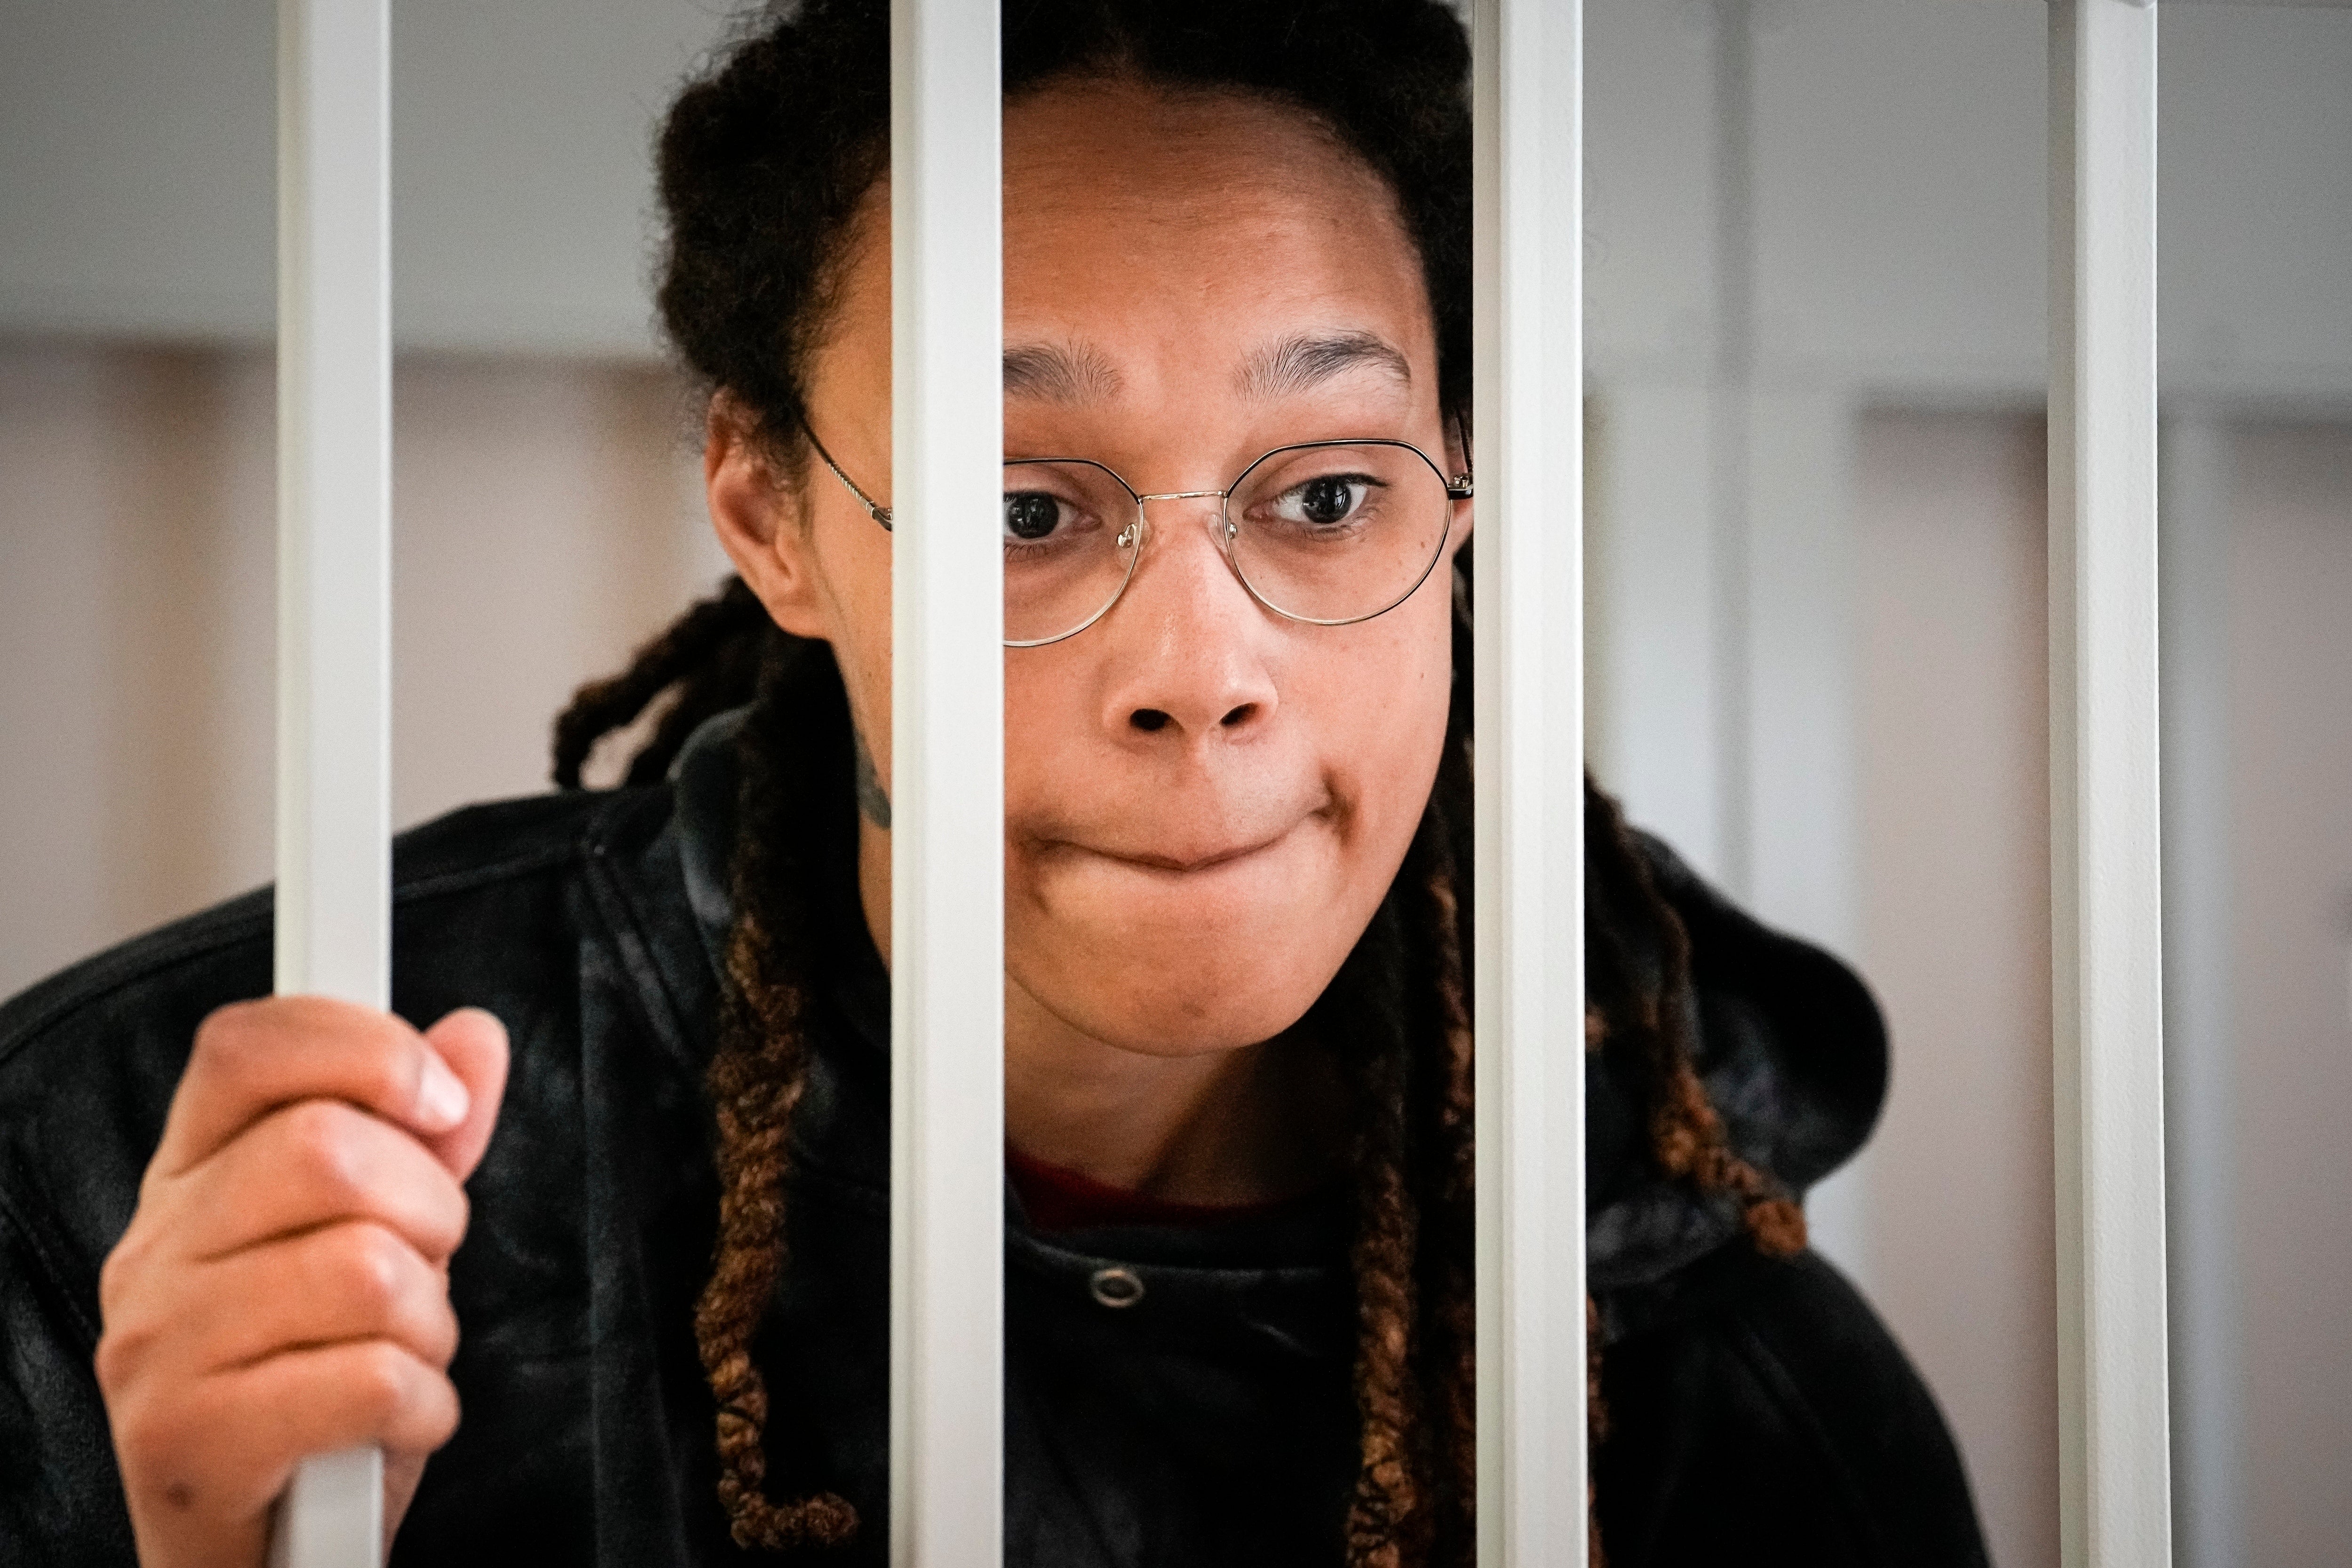 WNBA star and two-time Olympic gold medalist Brittney Griner speaks to her lawyers from inside a cage in a courtroom